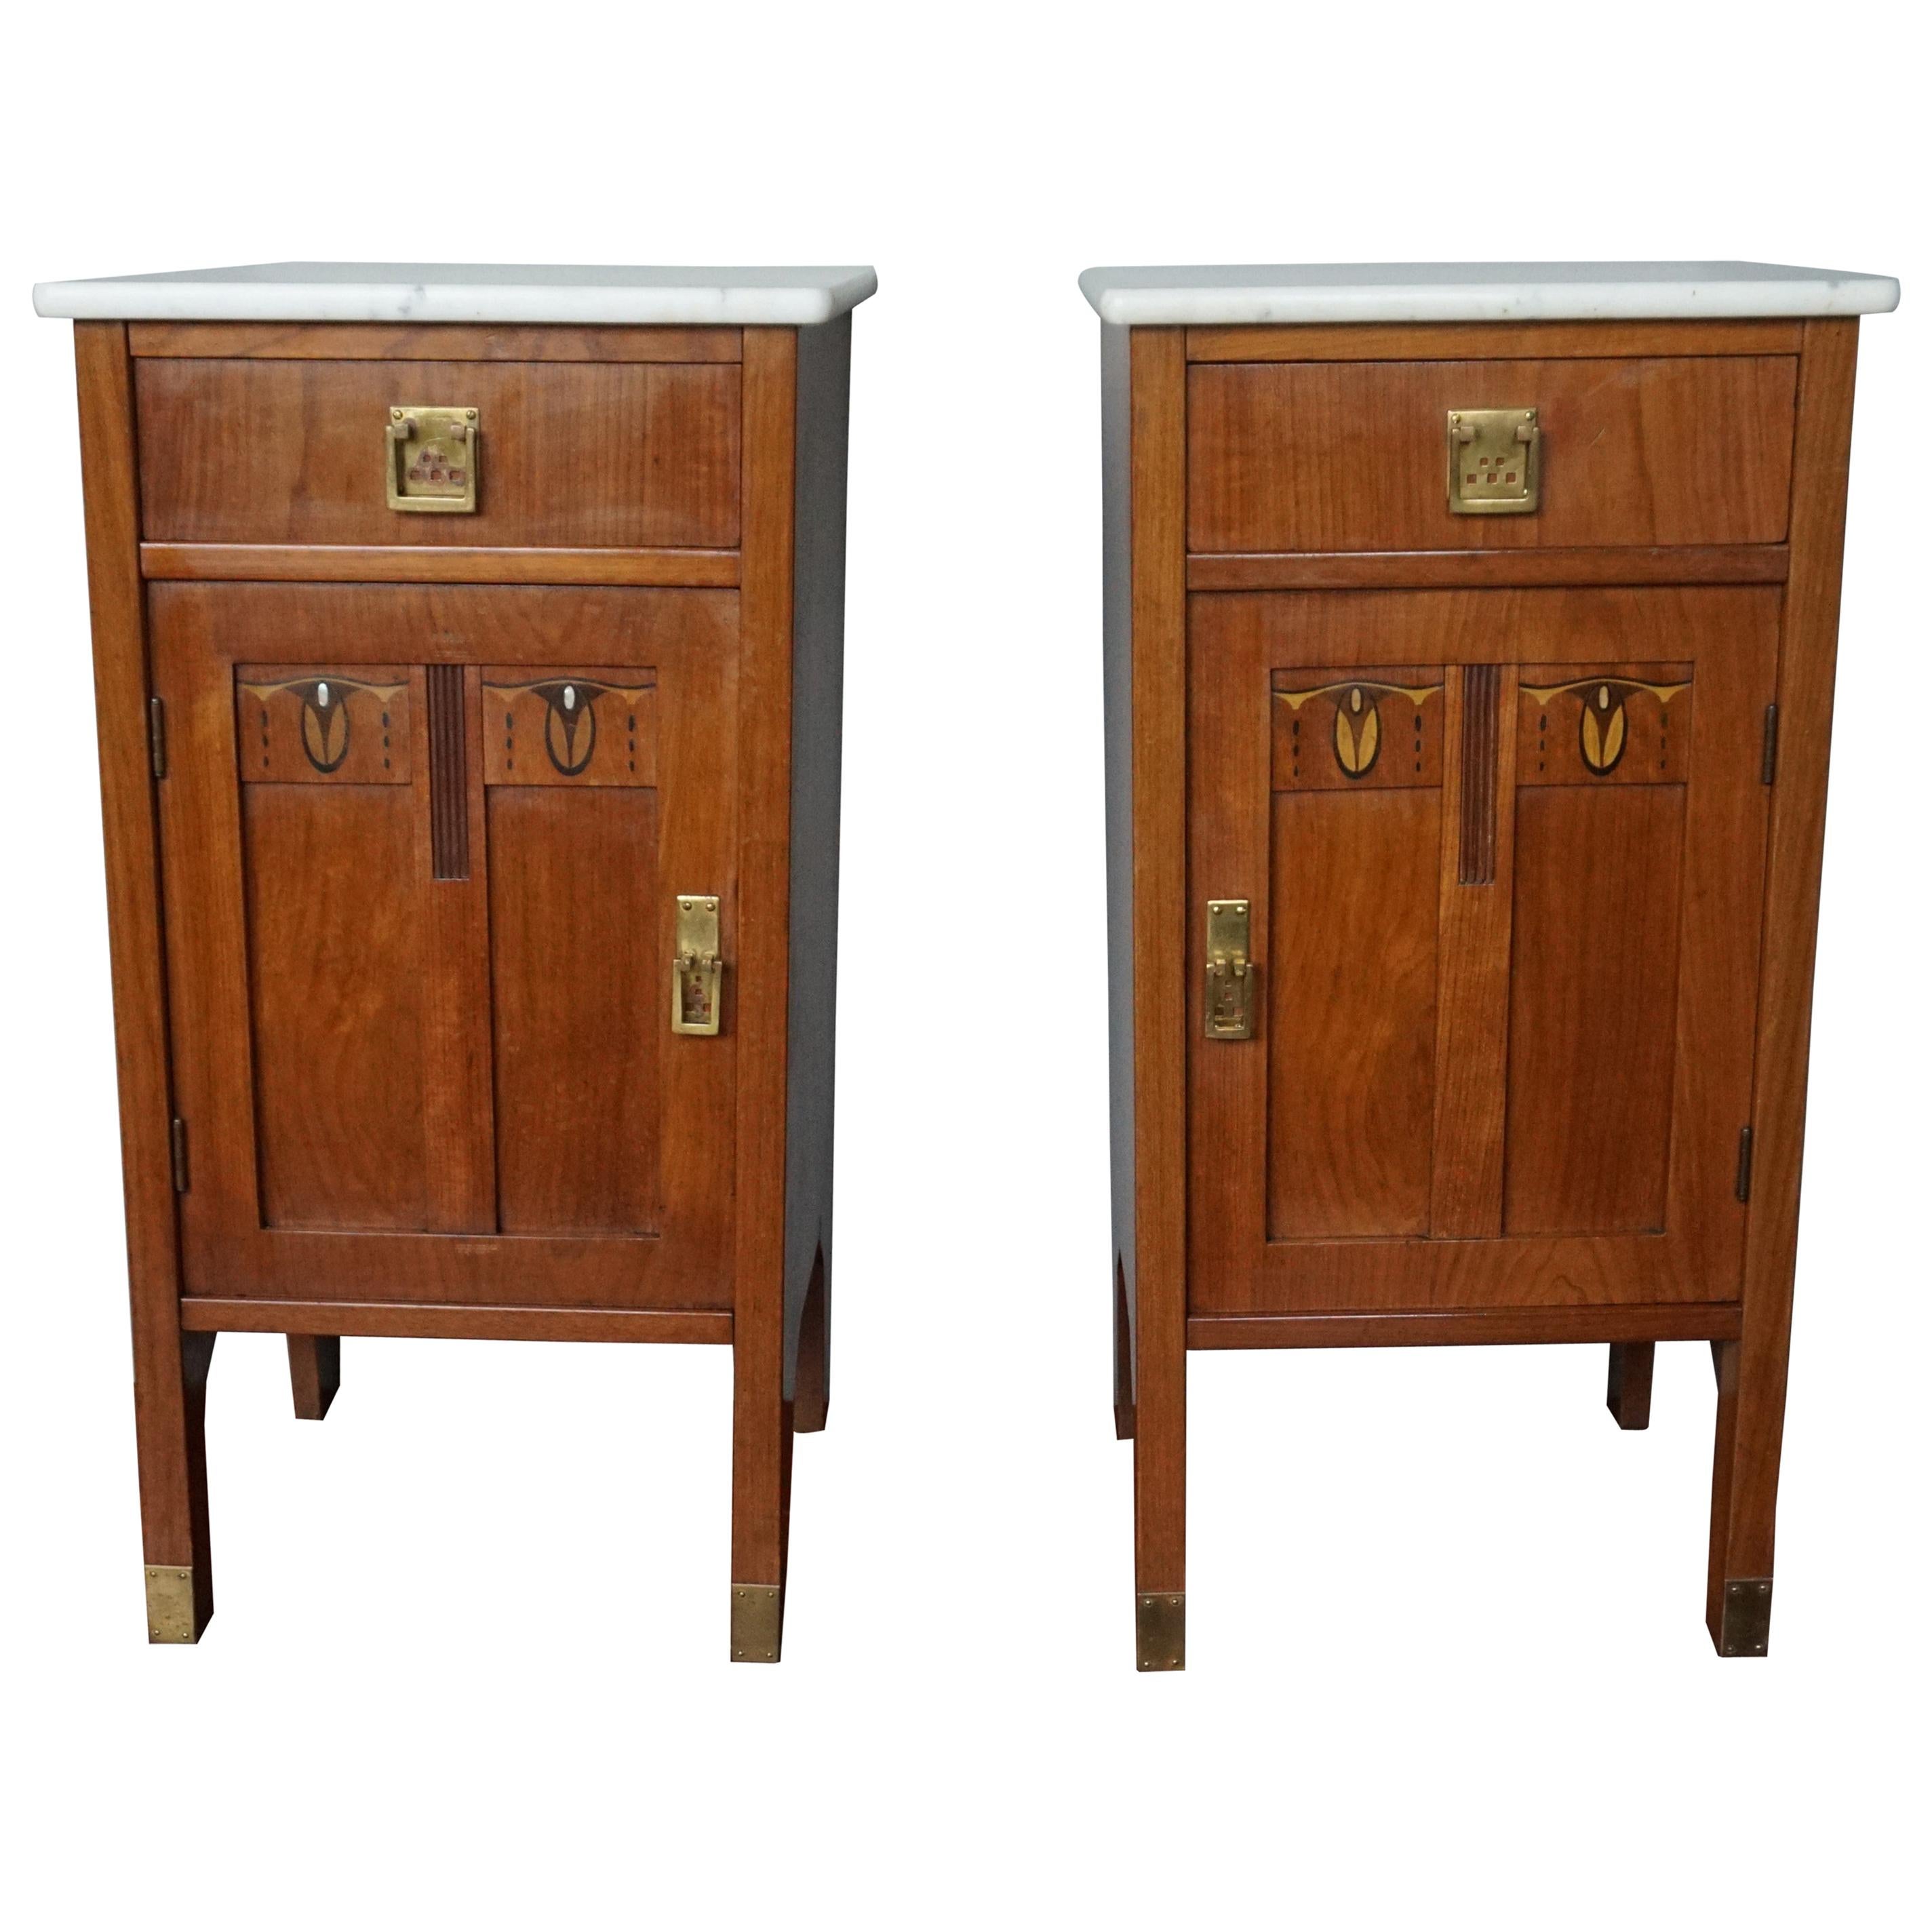 Antique Pair of Inlaid Arts and Crafts Nightstands / Bed Cabinets w. Marble Tops